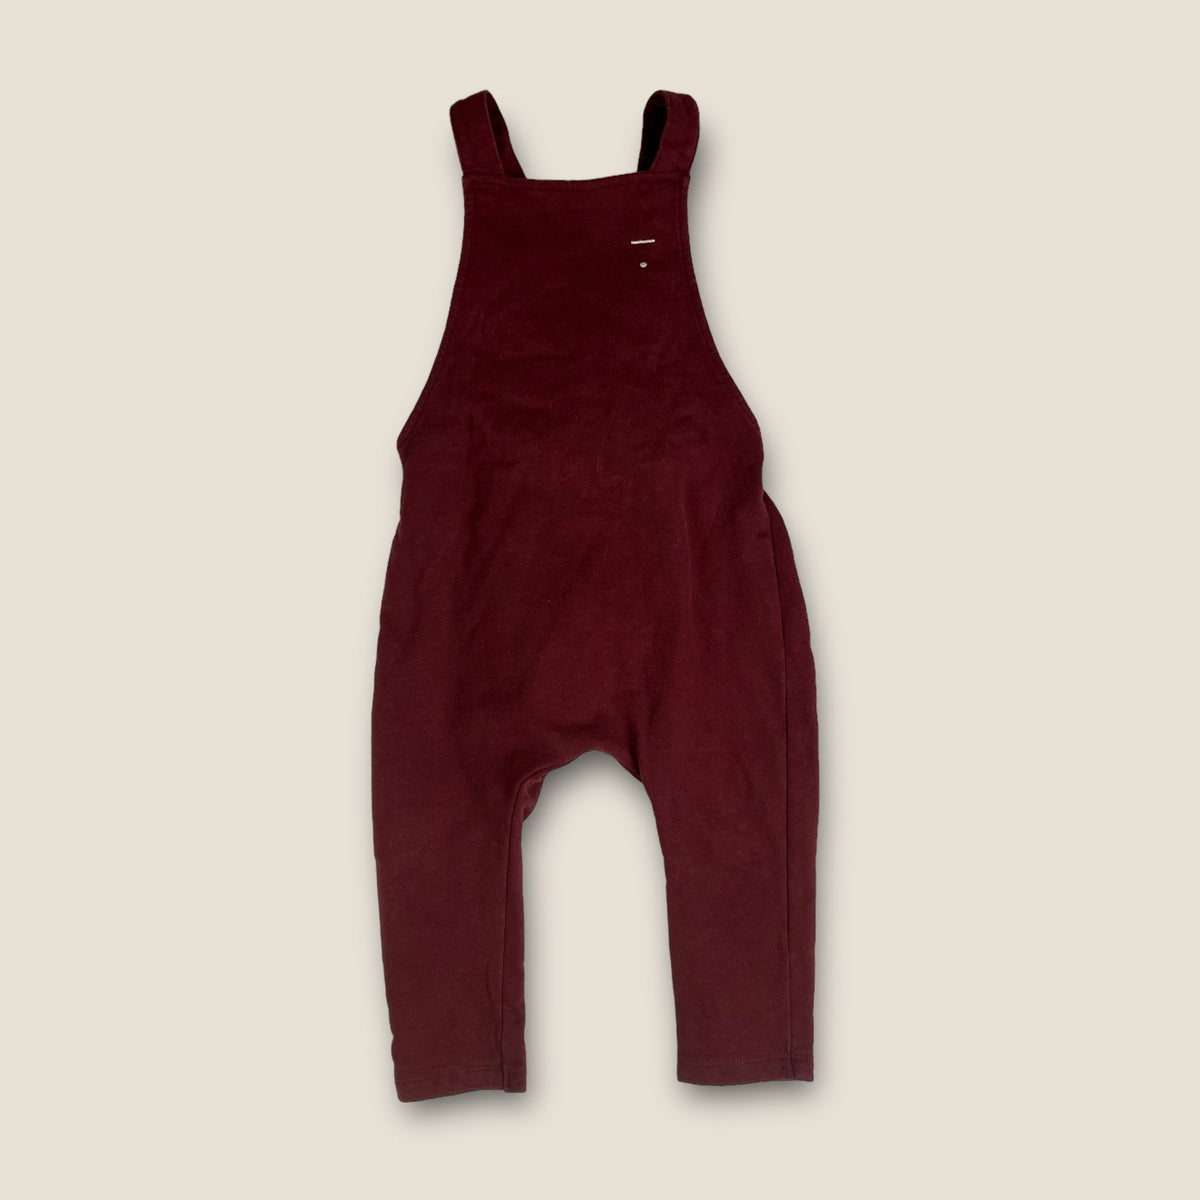 Gray Label Maroon Salopettes size 18-24 months